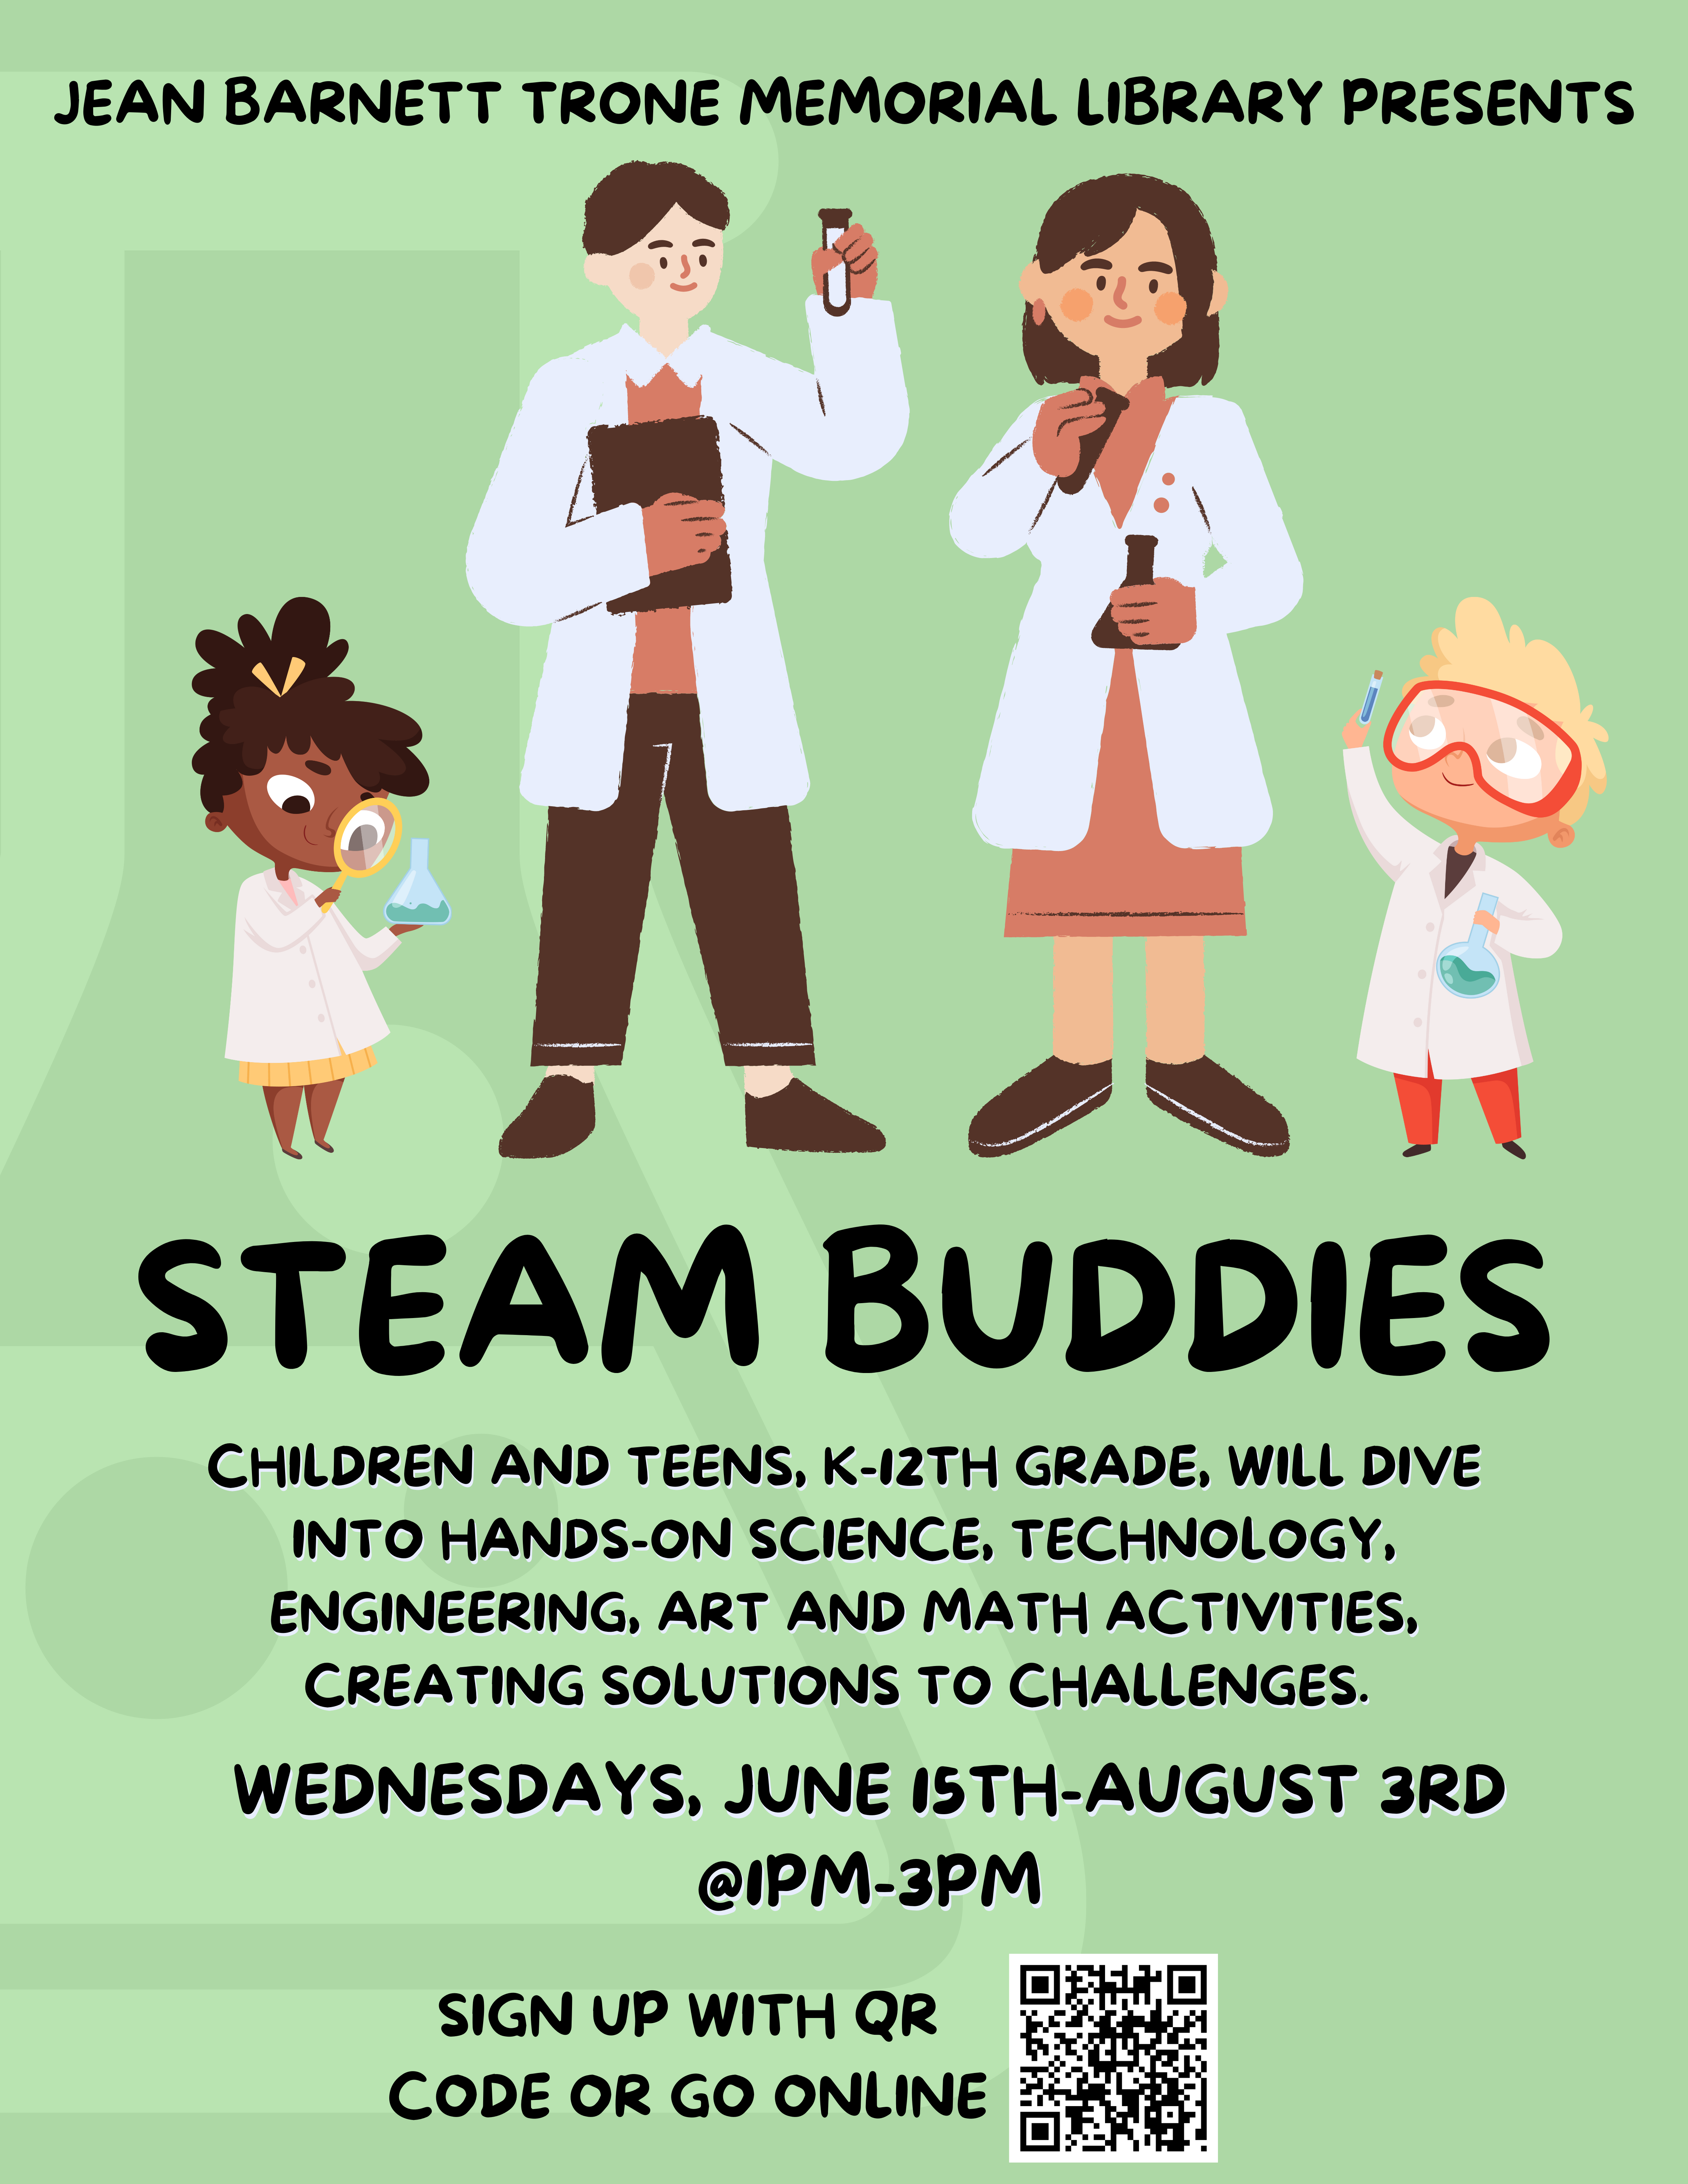 A girl, a man, a woman, and a boy stand next to each other holding science equipment. Text reads, "STEAM Buddies: Introducing Steam Buddies! Children and teens, K-12TH Grade, will dive into hands-on Science, Technology, Engineering, Art and Math activities, creating solutions to challenges." 